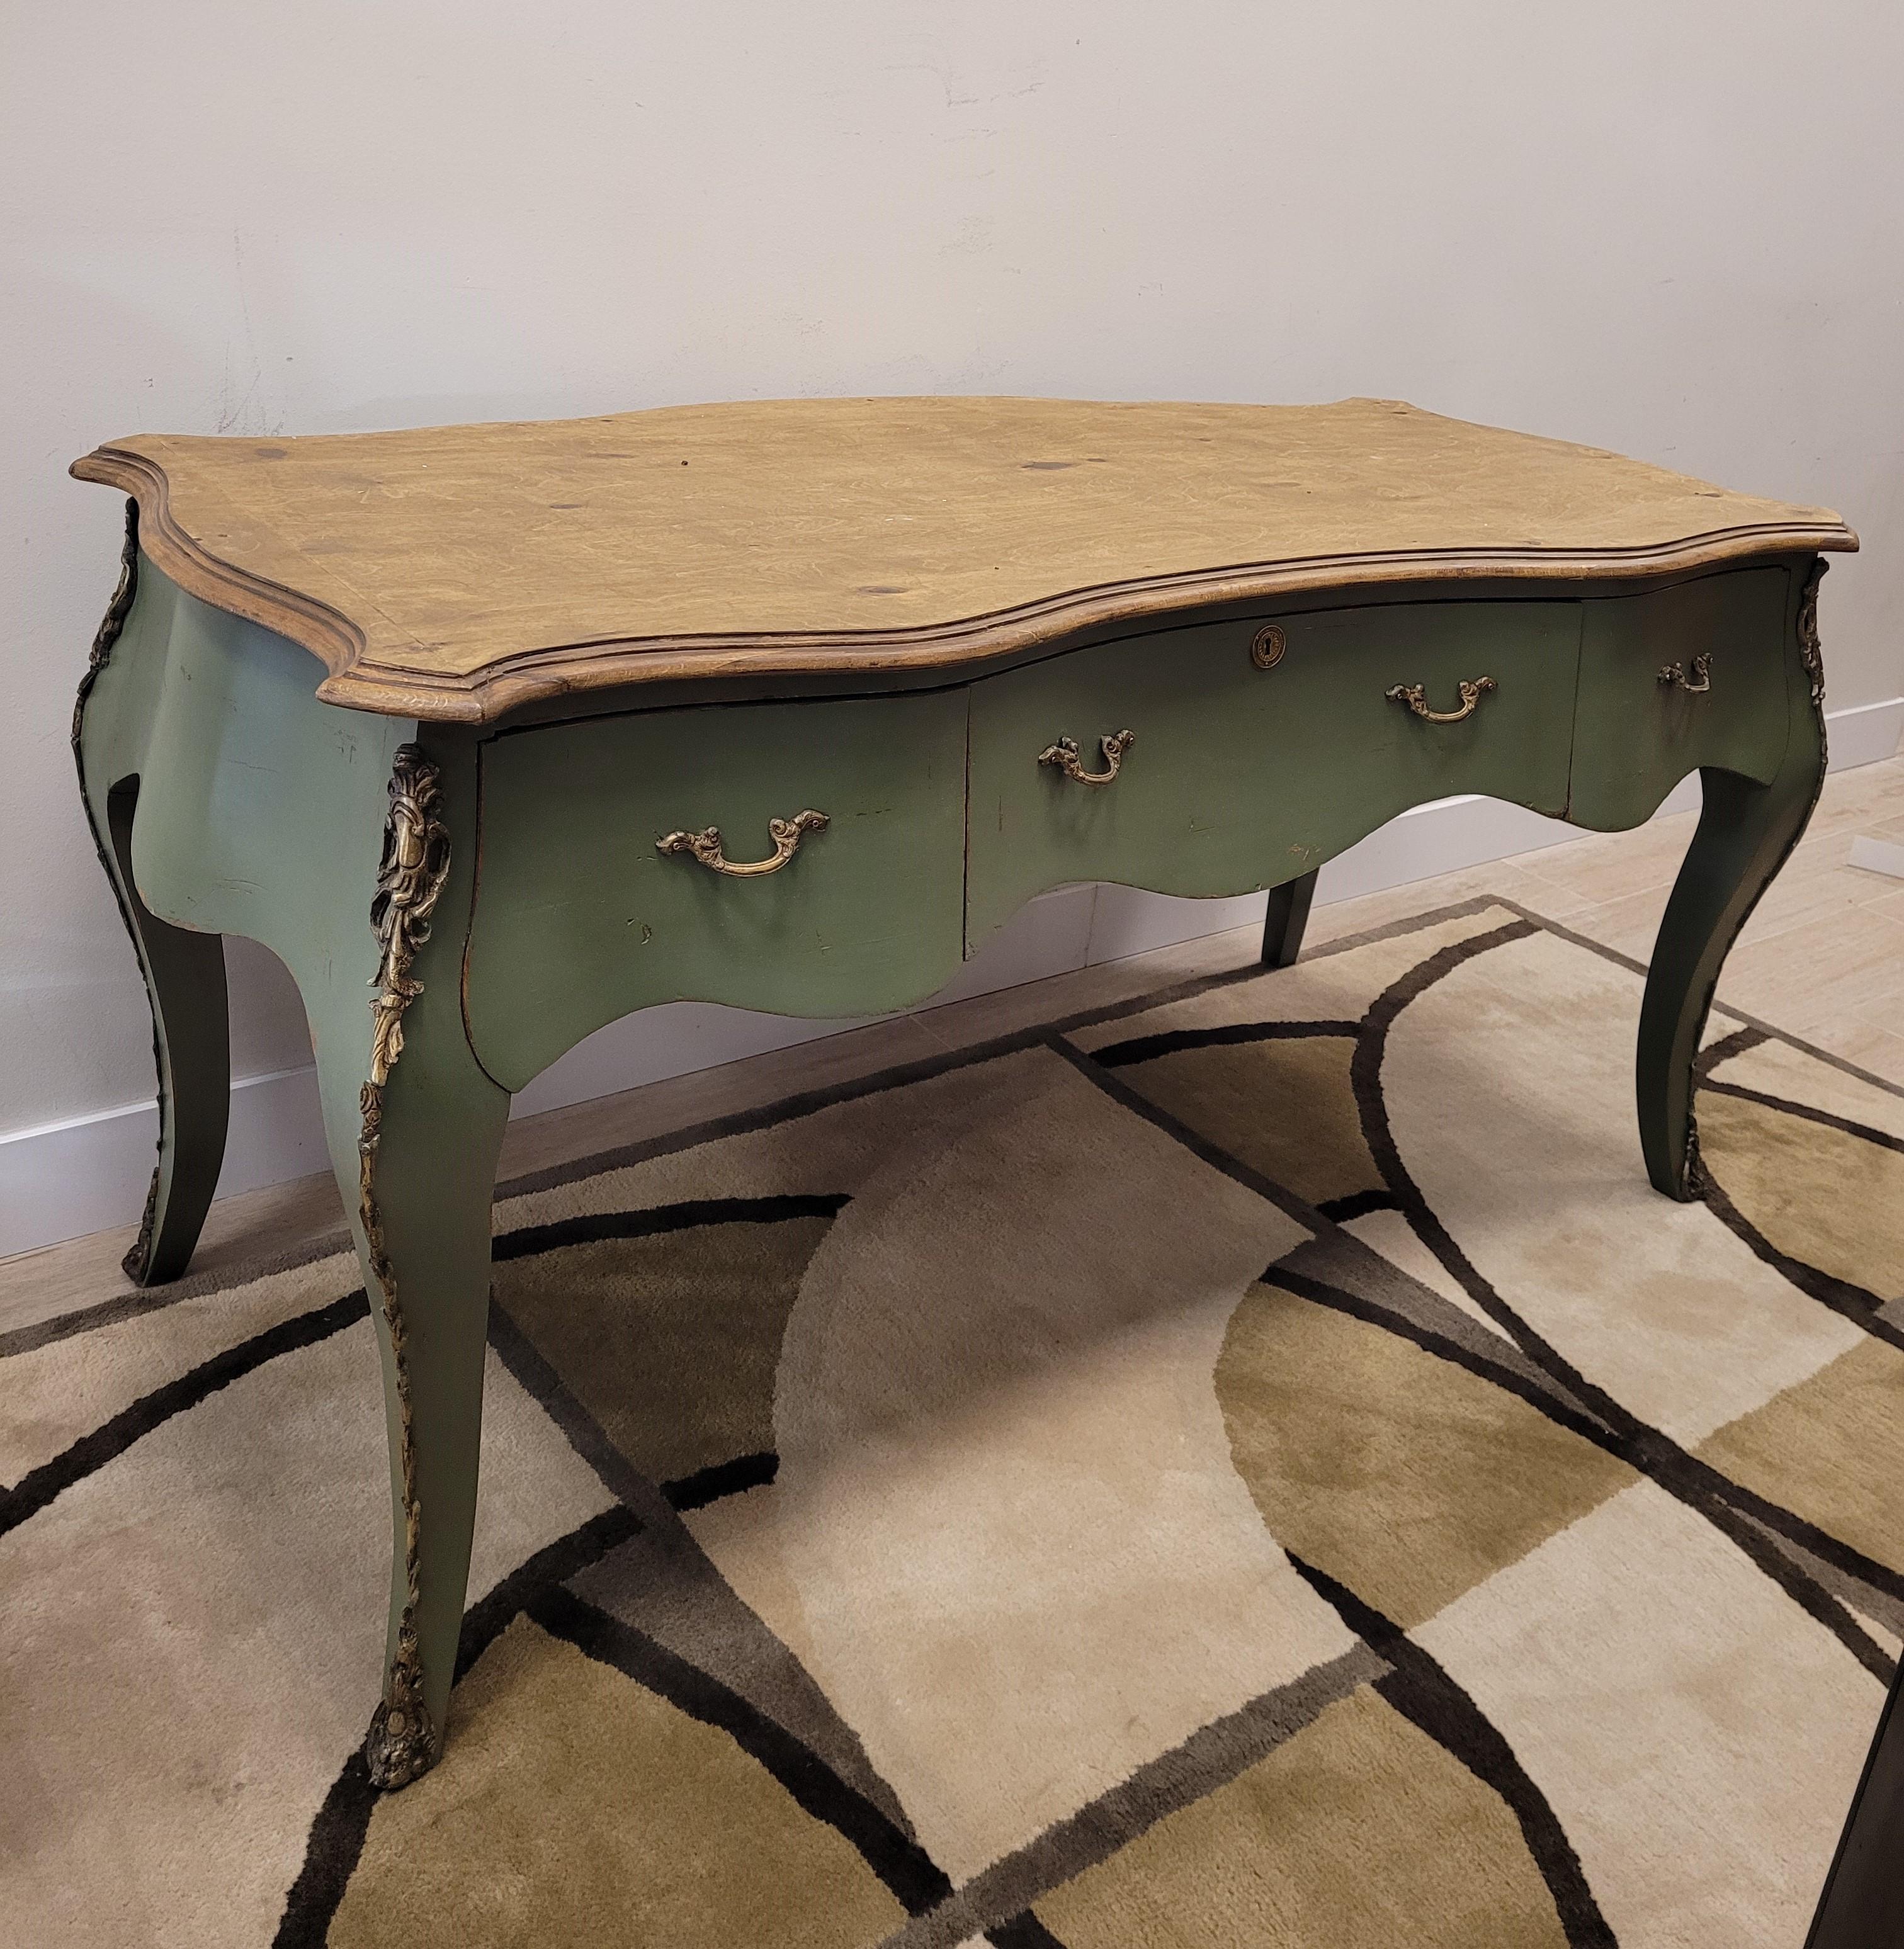 Provençal Green Center Console  table, polychrome, 50's - 60's - France For Sale 3